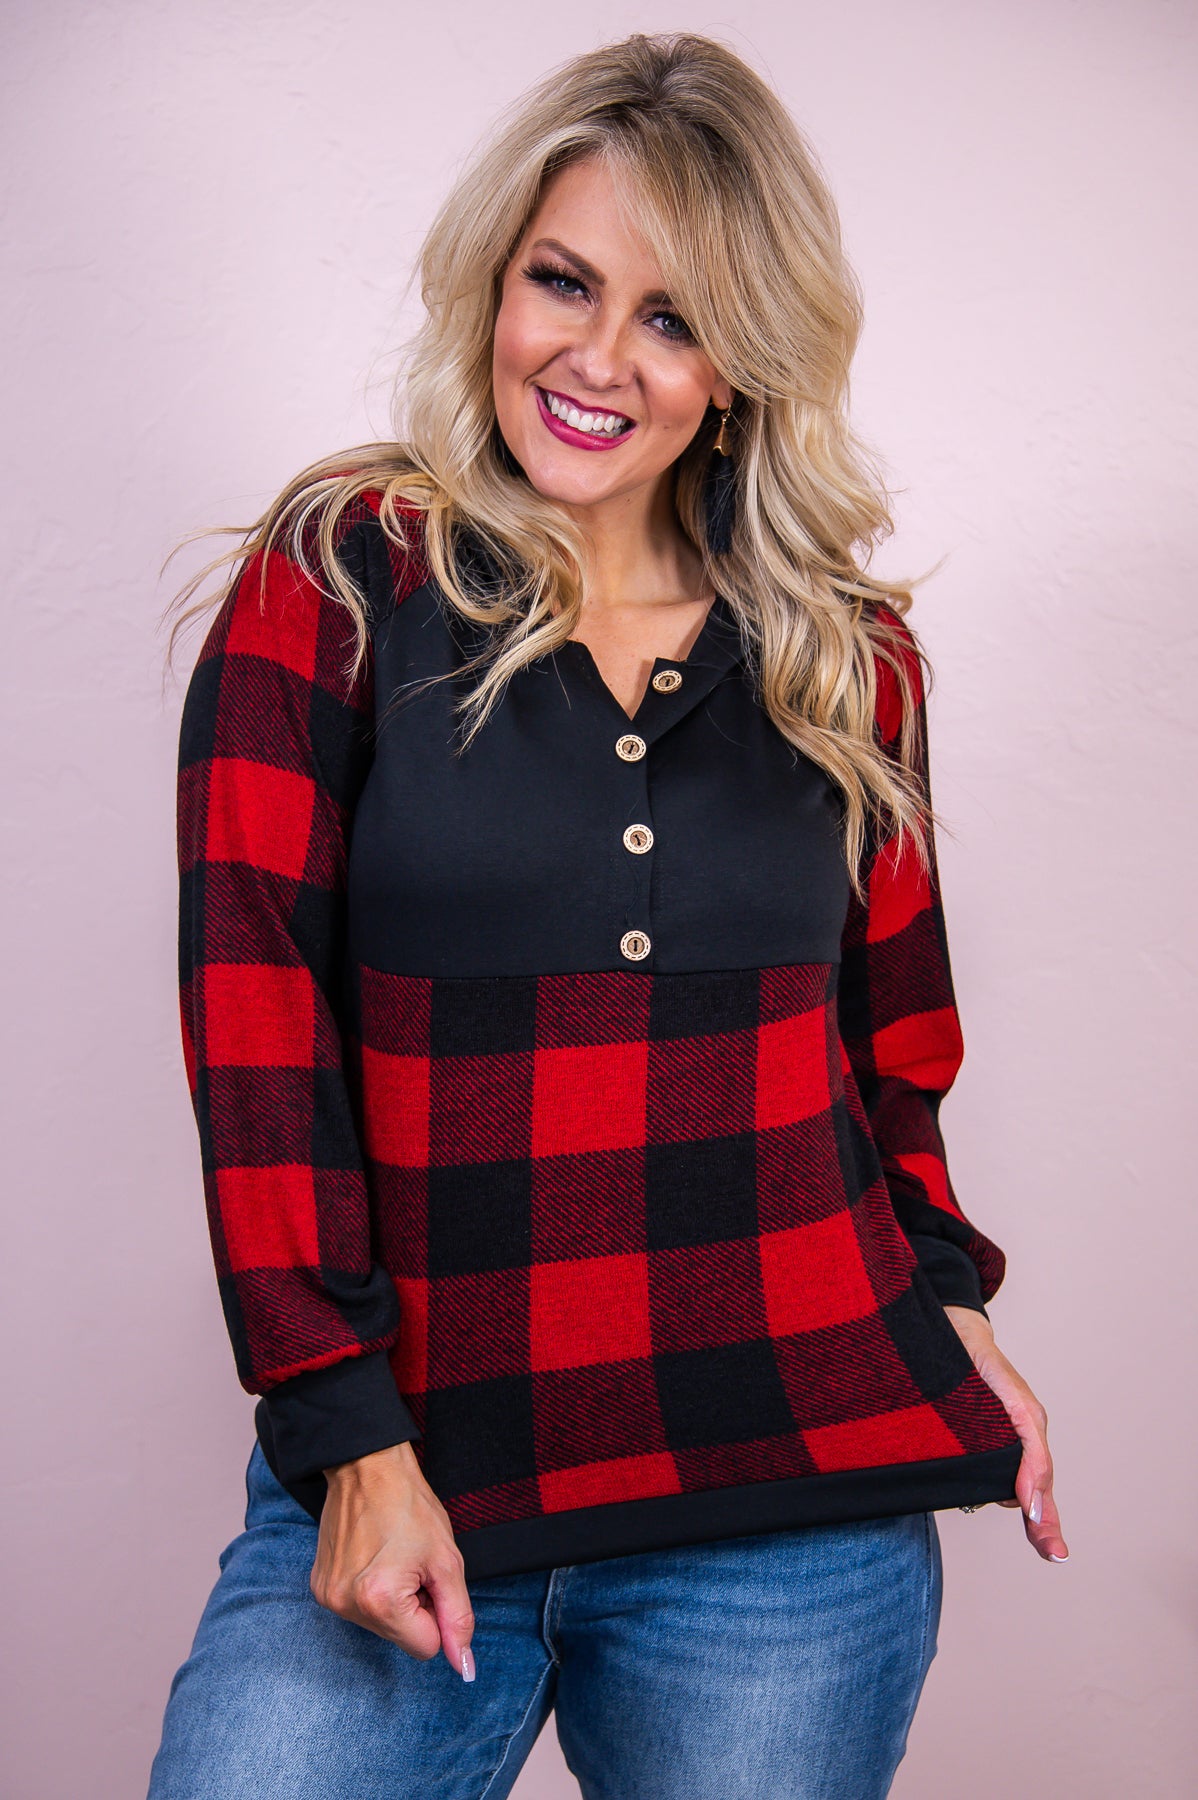 Sensational Style Black/Red Checkered Hooded Top - T8125BK